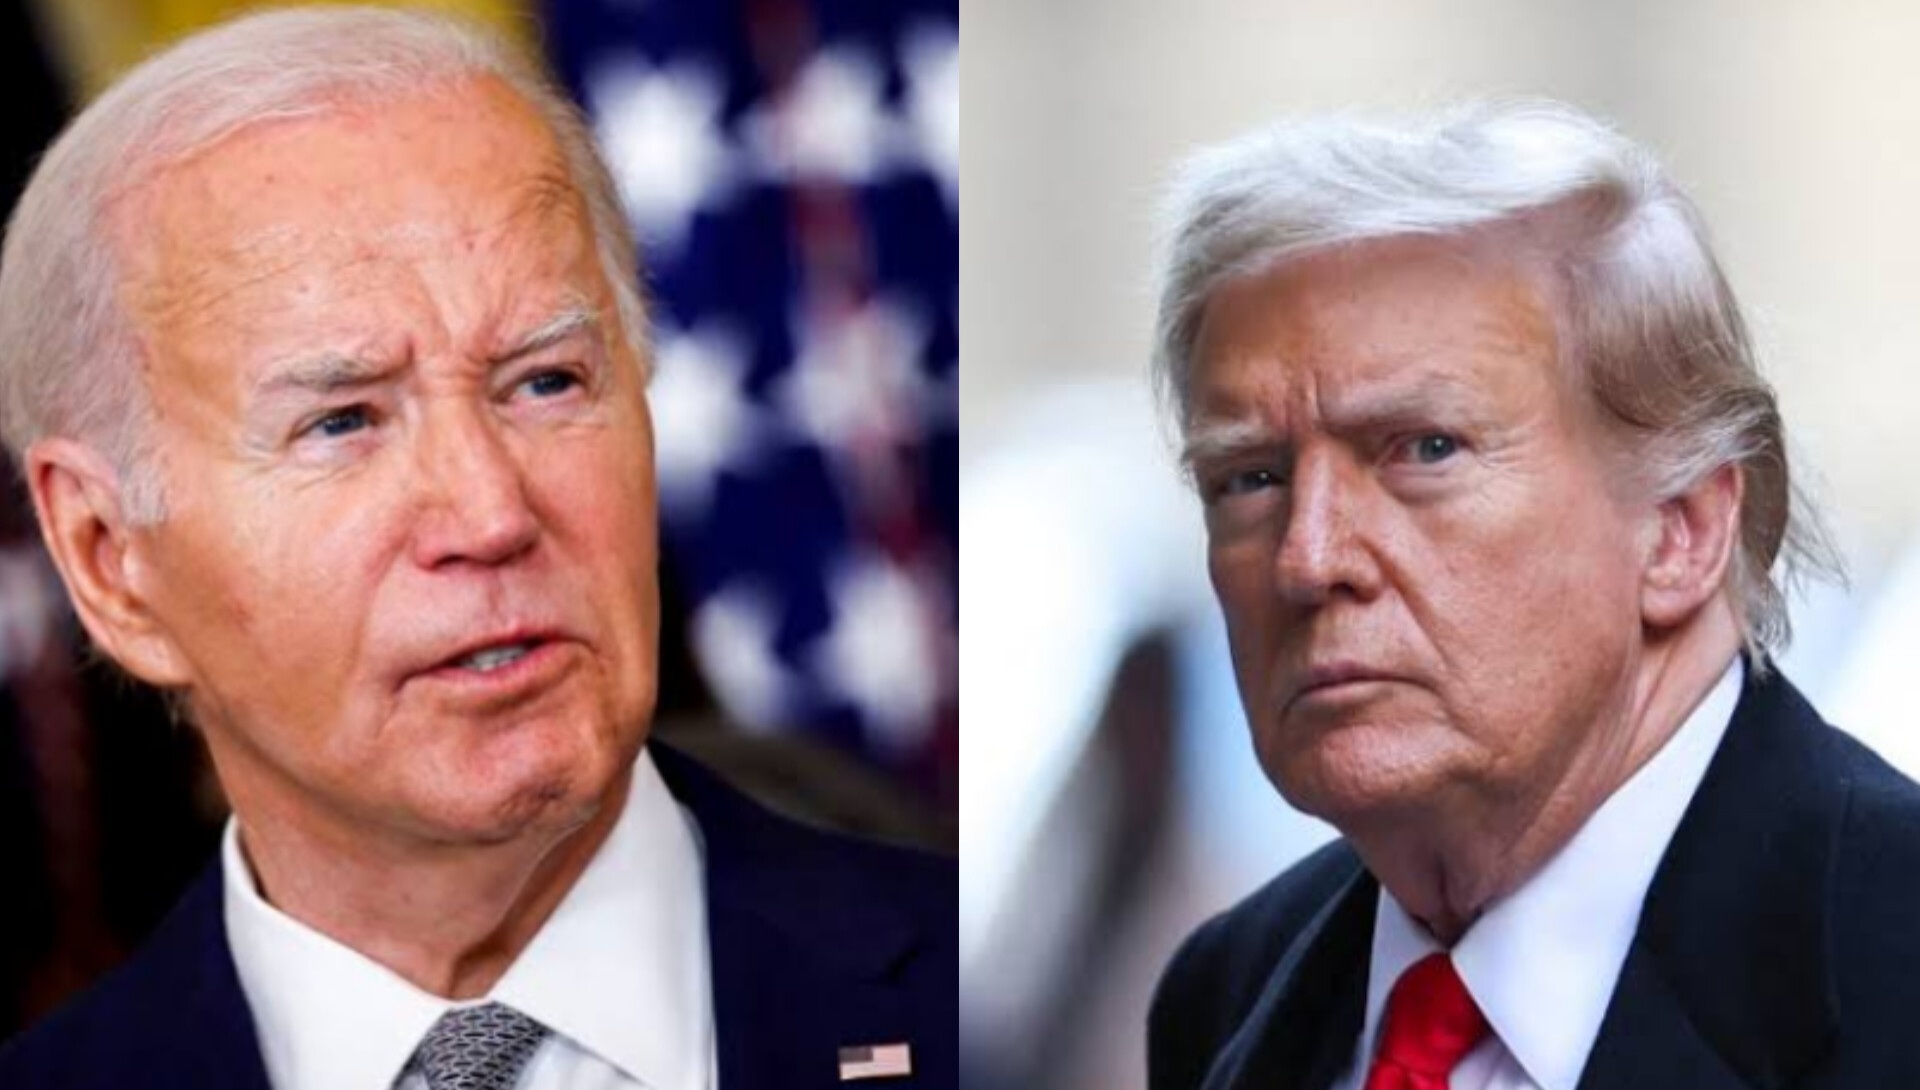 Watch Joe Biden Stumble and Lose His Train of Thought During Debate with Trump (Videos)